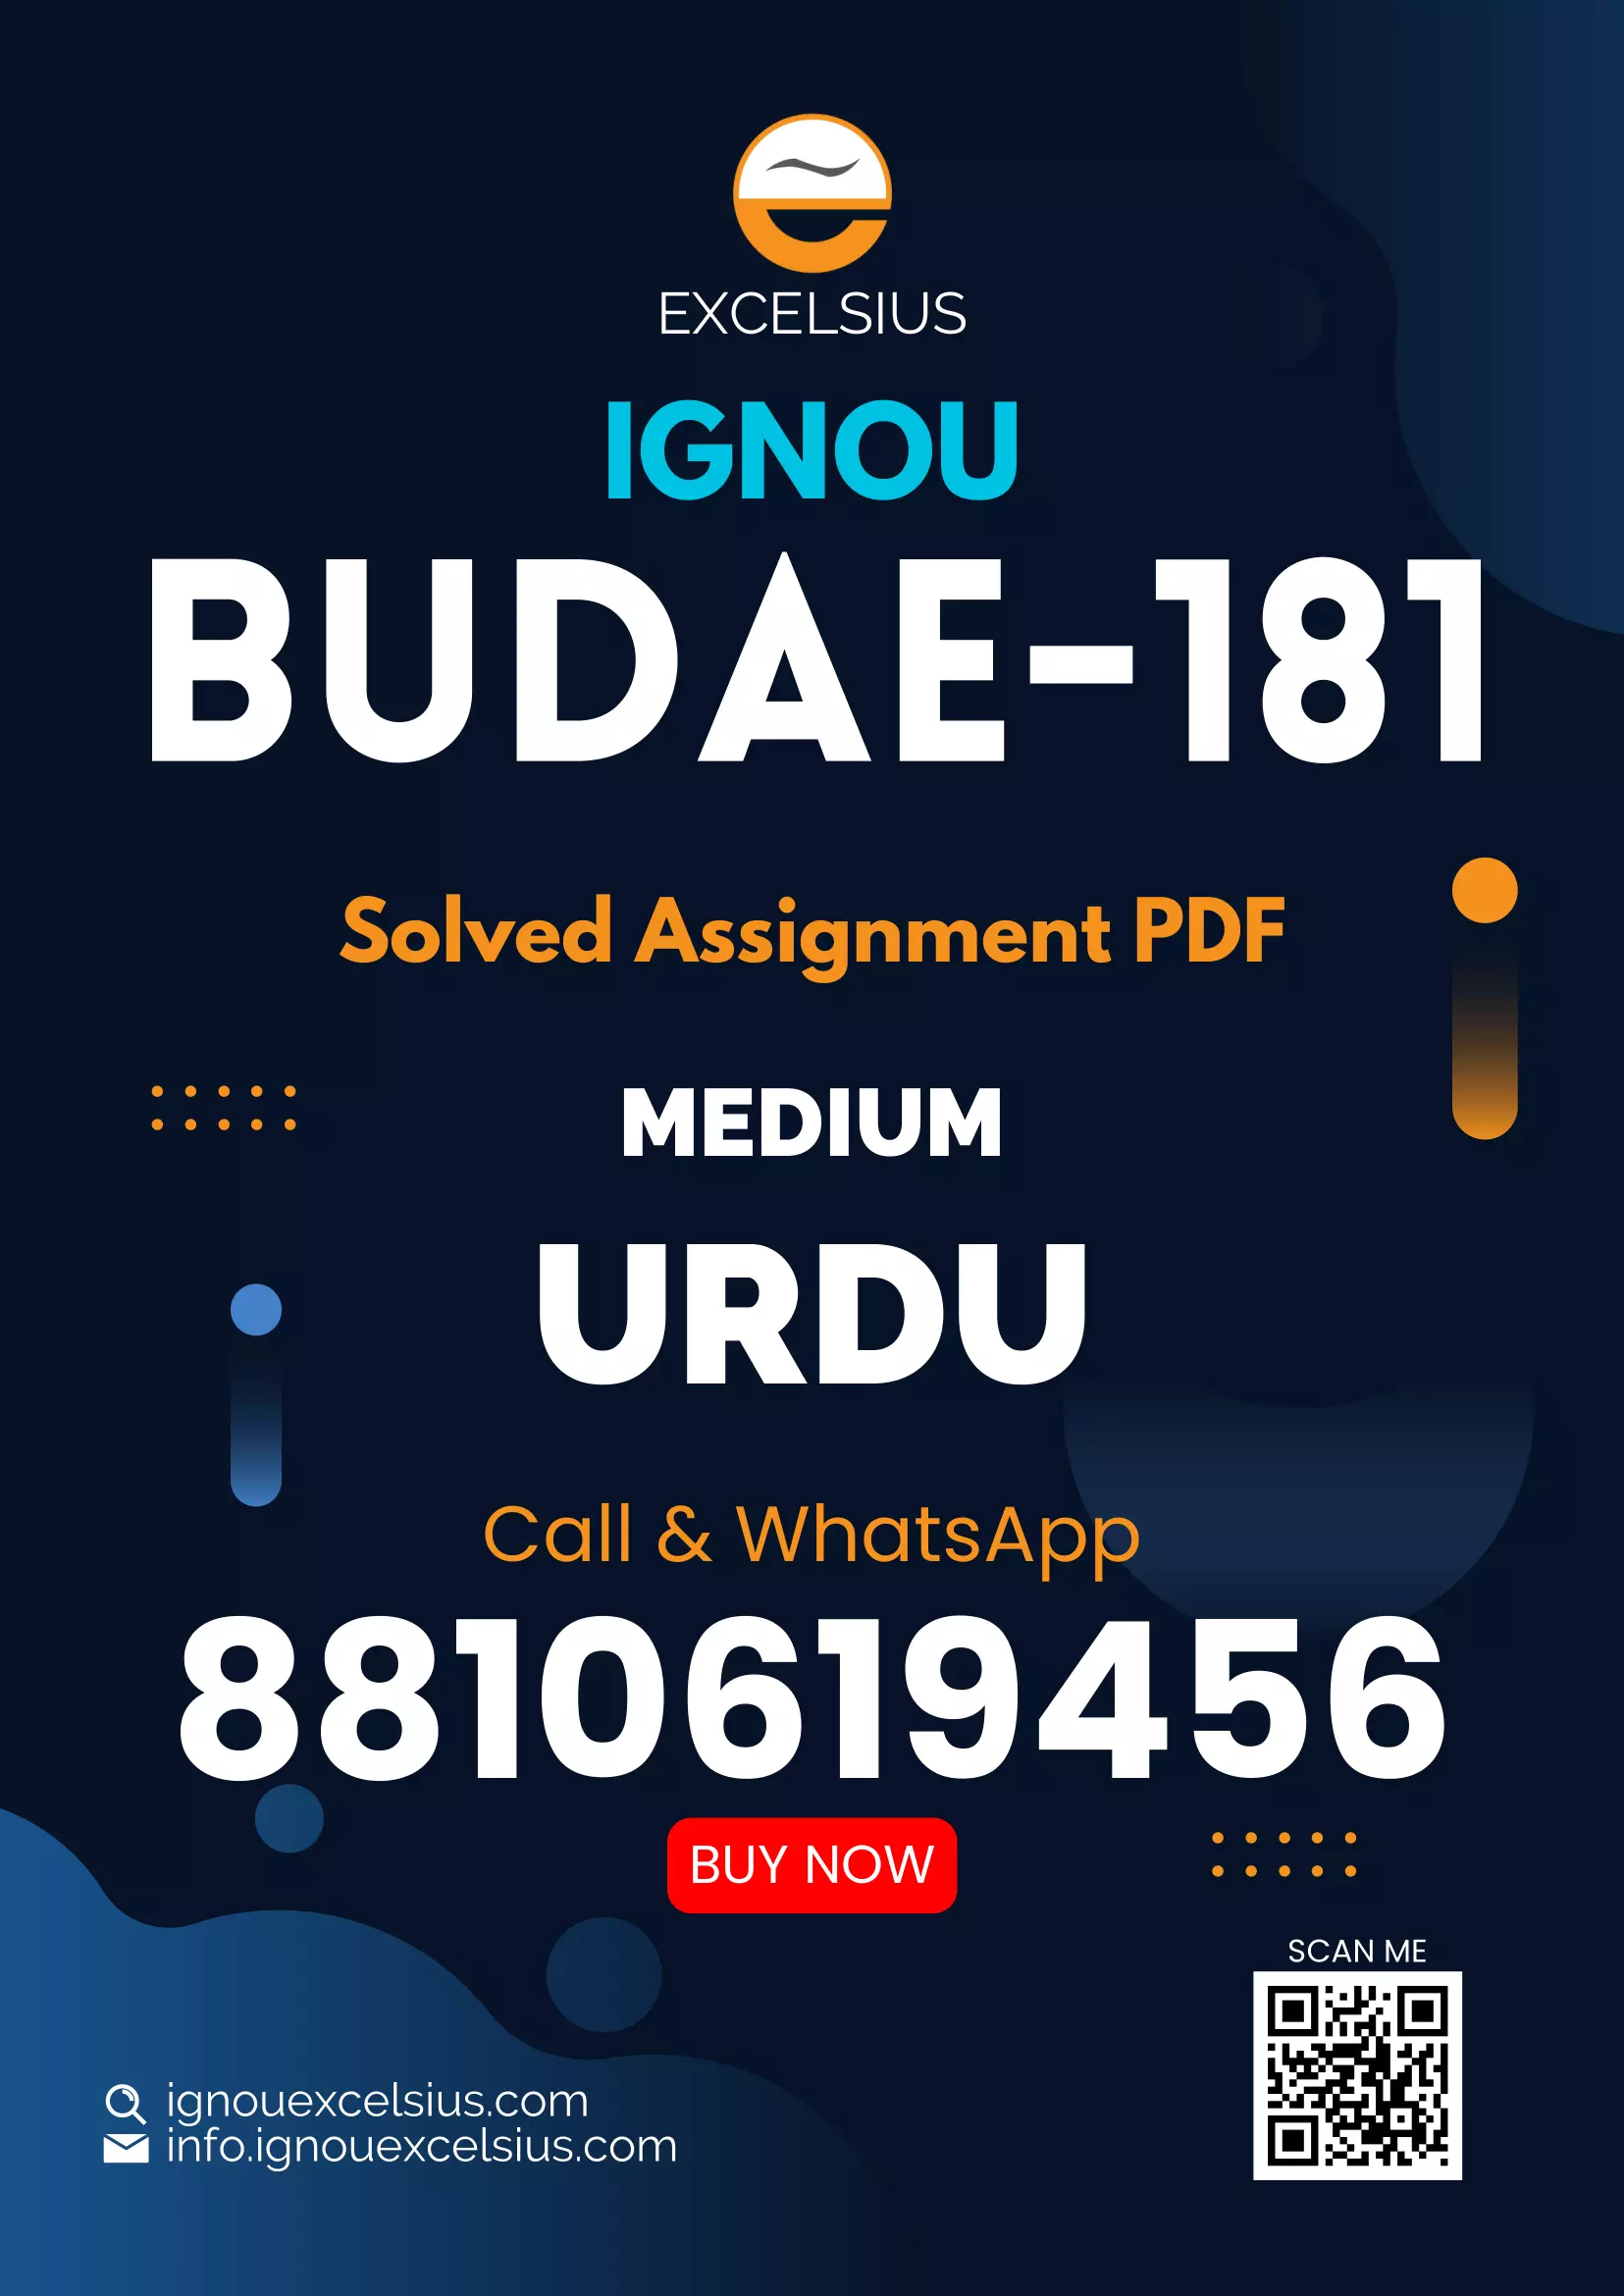 IGNOU BUDAE-181 - Study of Classical Urdu Ghazal Latest Solved Assignment-July 2022 – January 2023